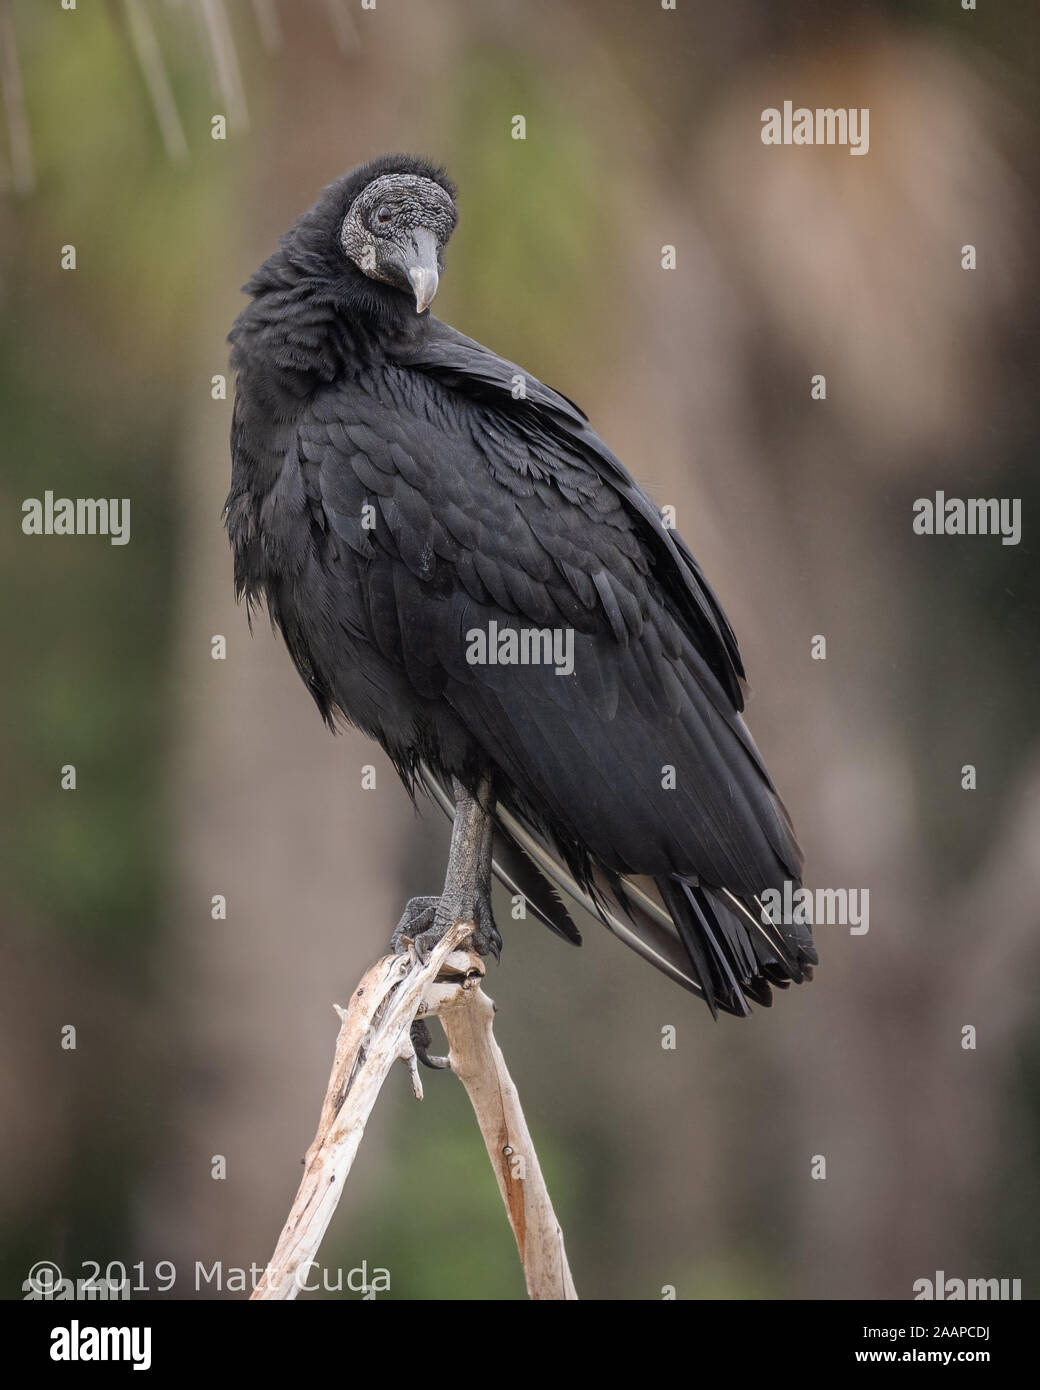 A black vulture perched Stock Photo - Alamy